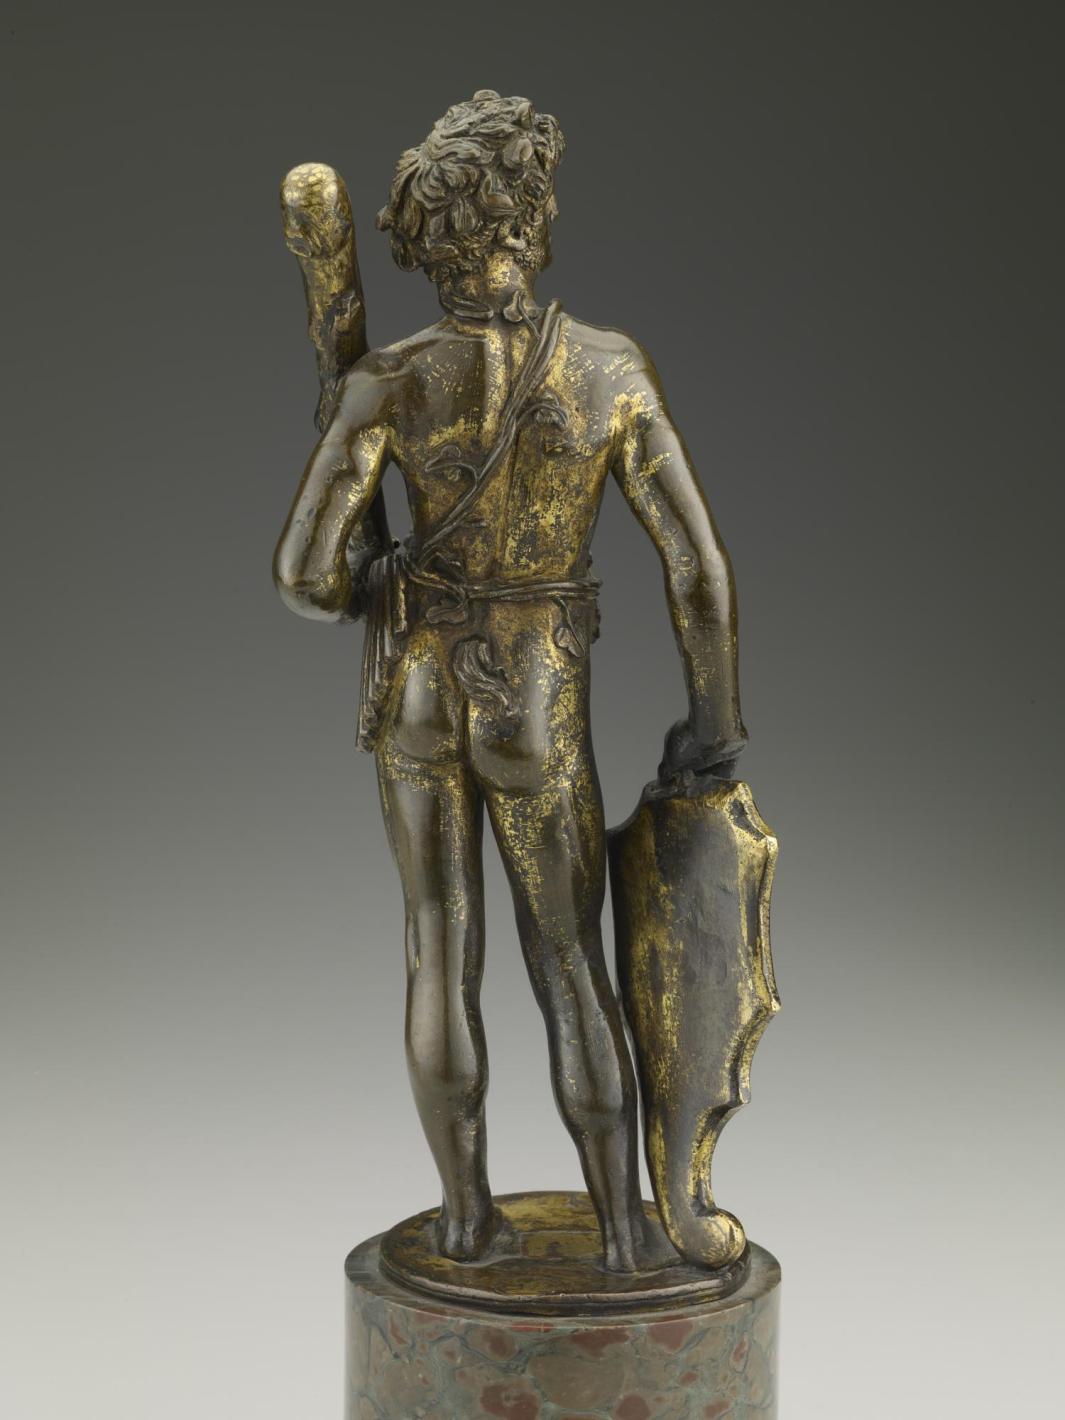 Back view of a bronze sculpture of a man standing upright.  His head is turned to his right and he is holding a club in his left hand.  A shield sits by his right leg and is underneath his right hand.